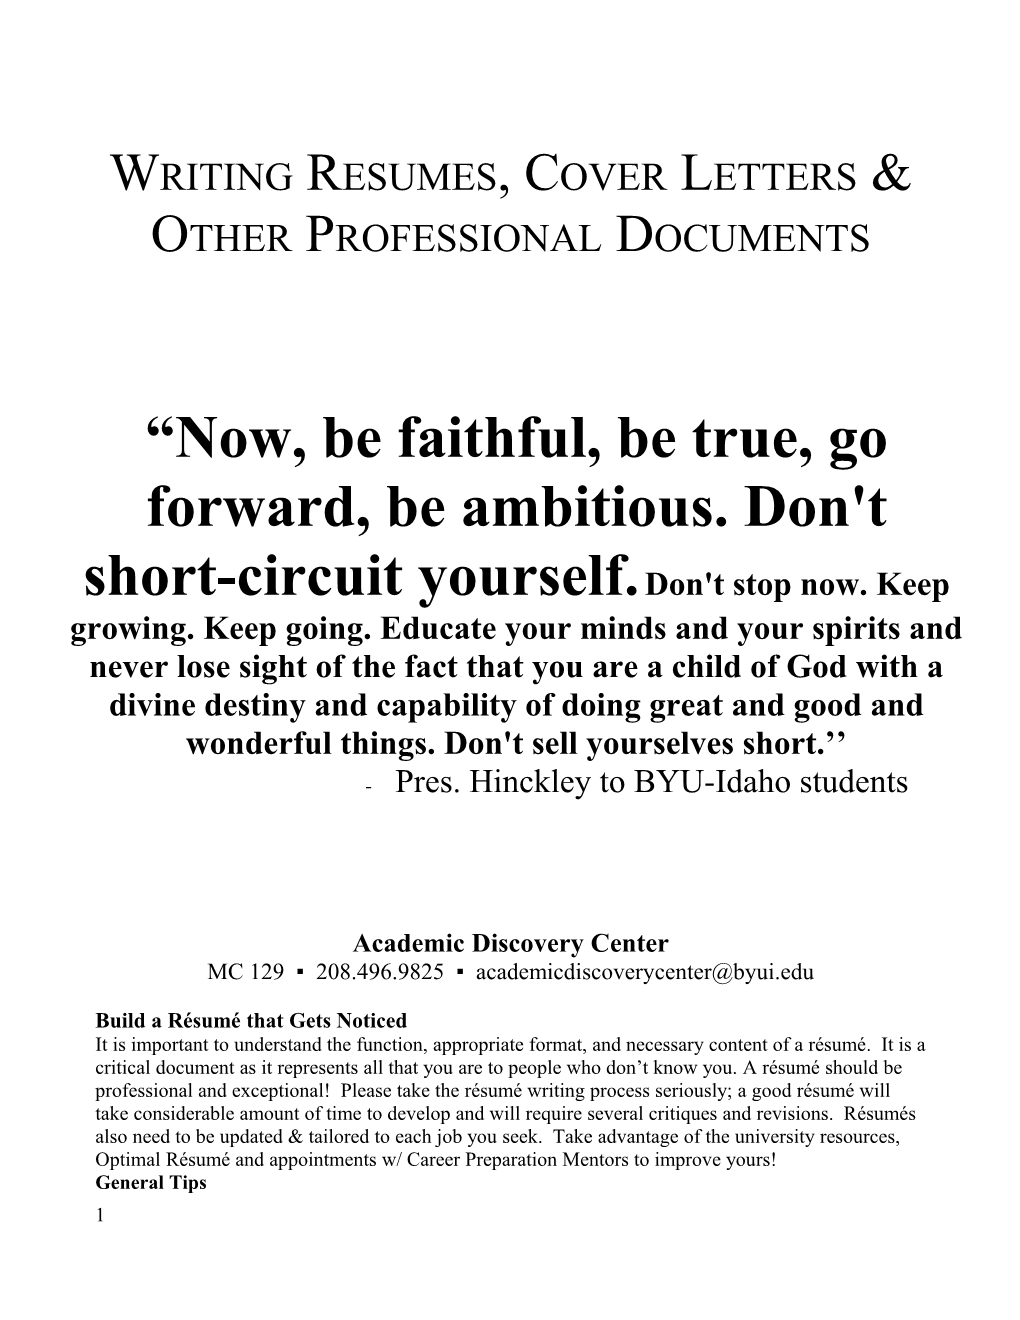 Writing Resumes, Cover Letters & Other Professional Documents